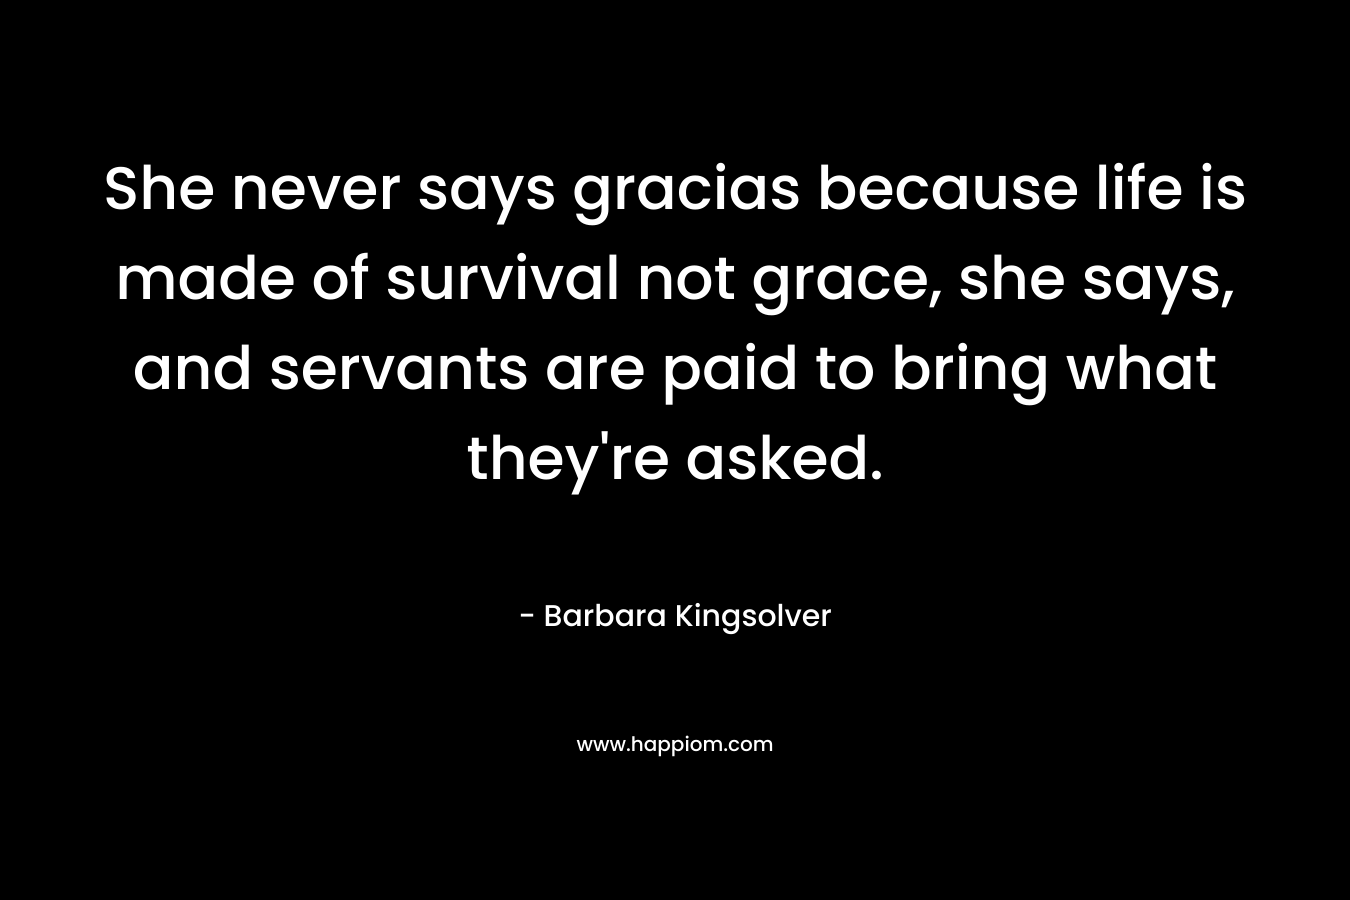 She never says gracias because life is made of survival not grace, she says, and servants are paid to bring what they're asked.